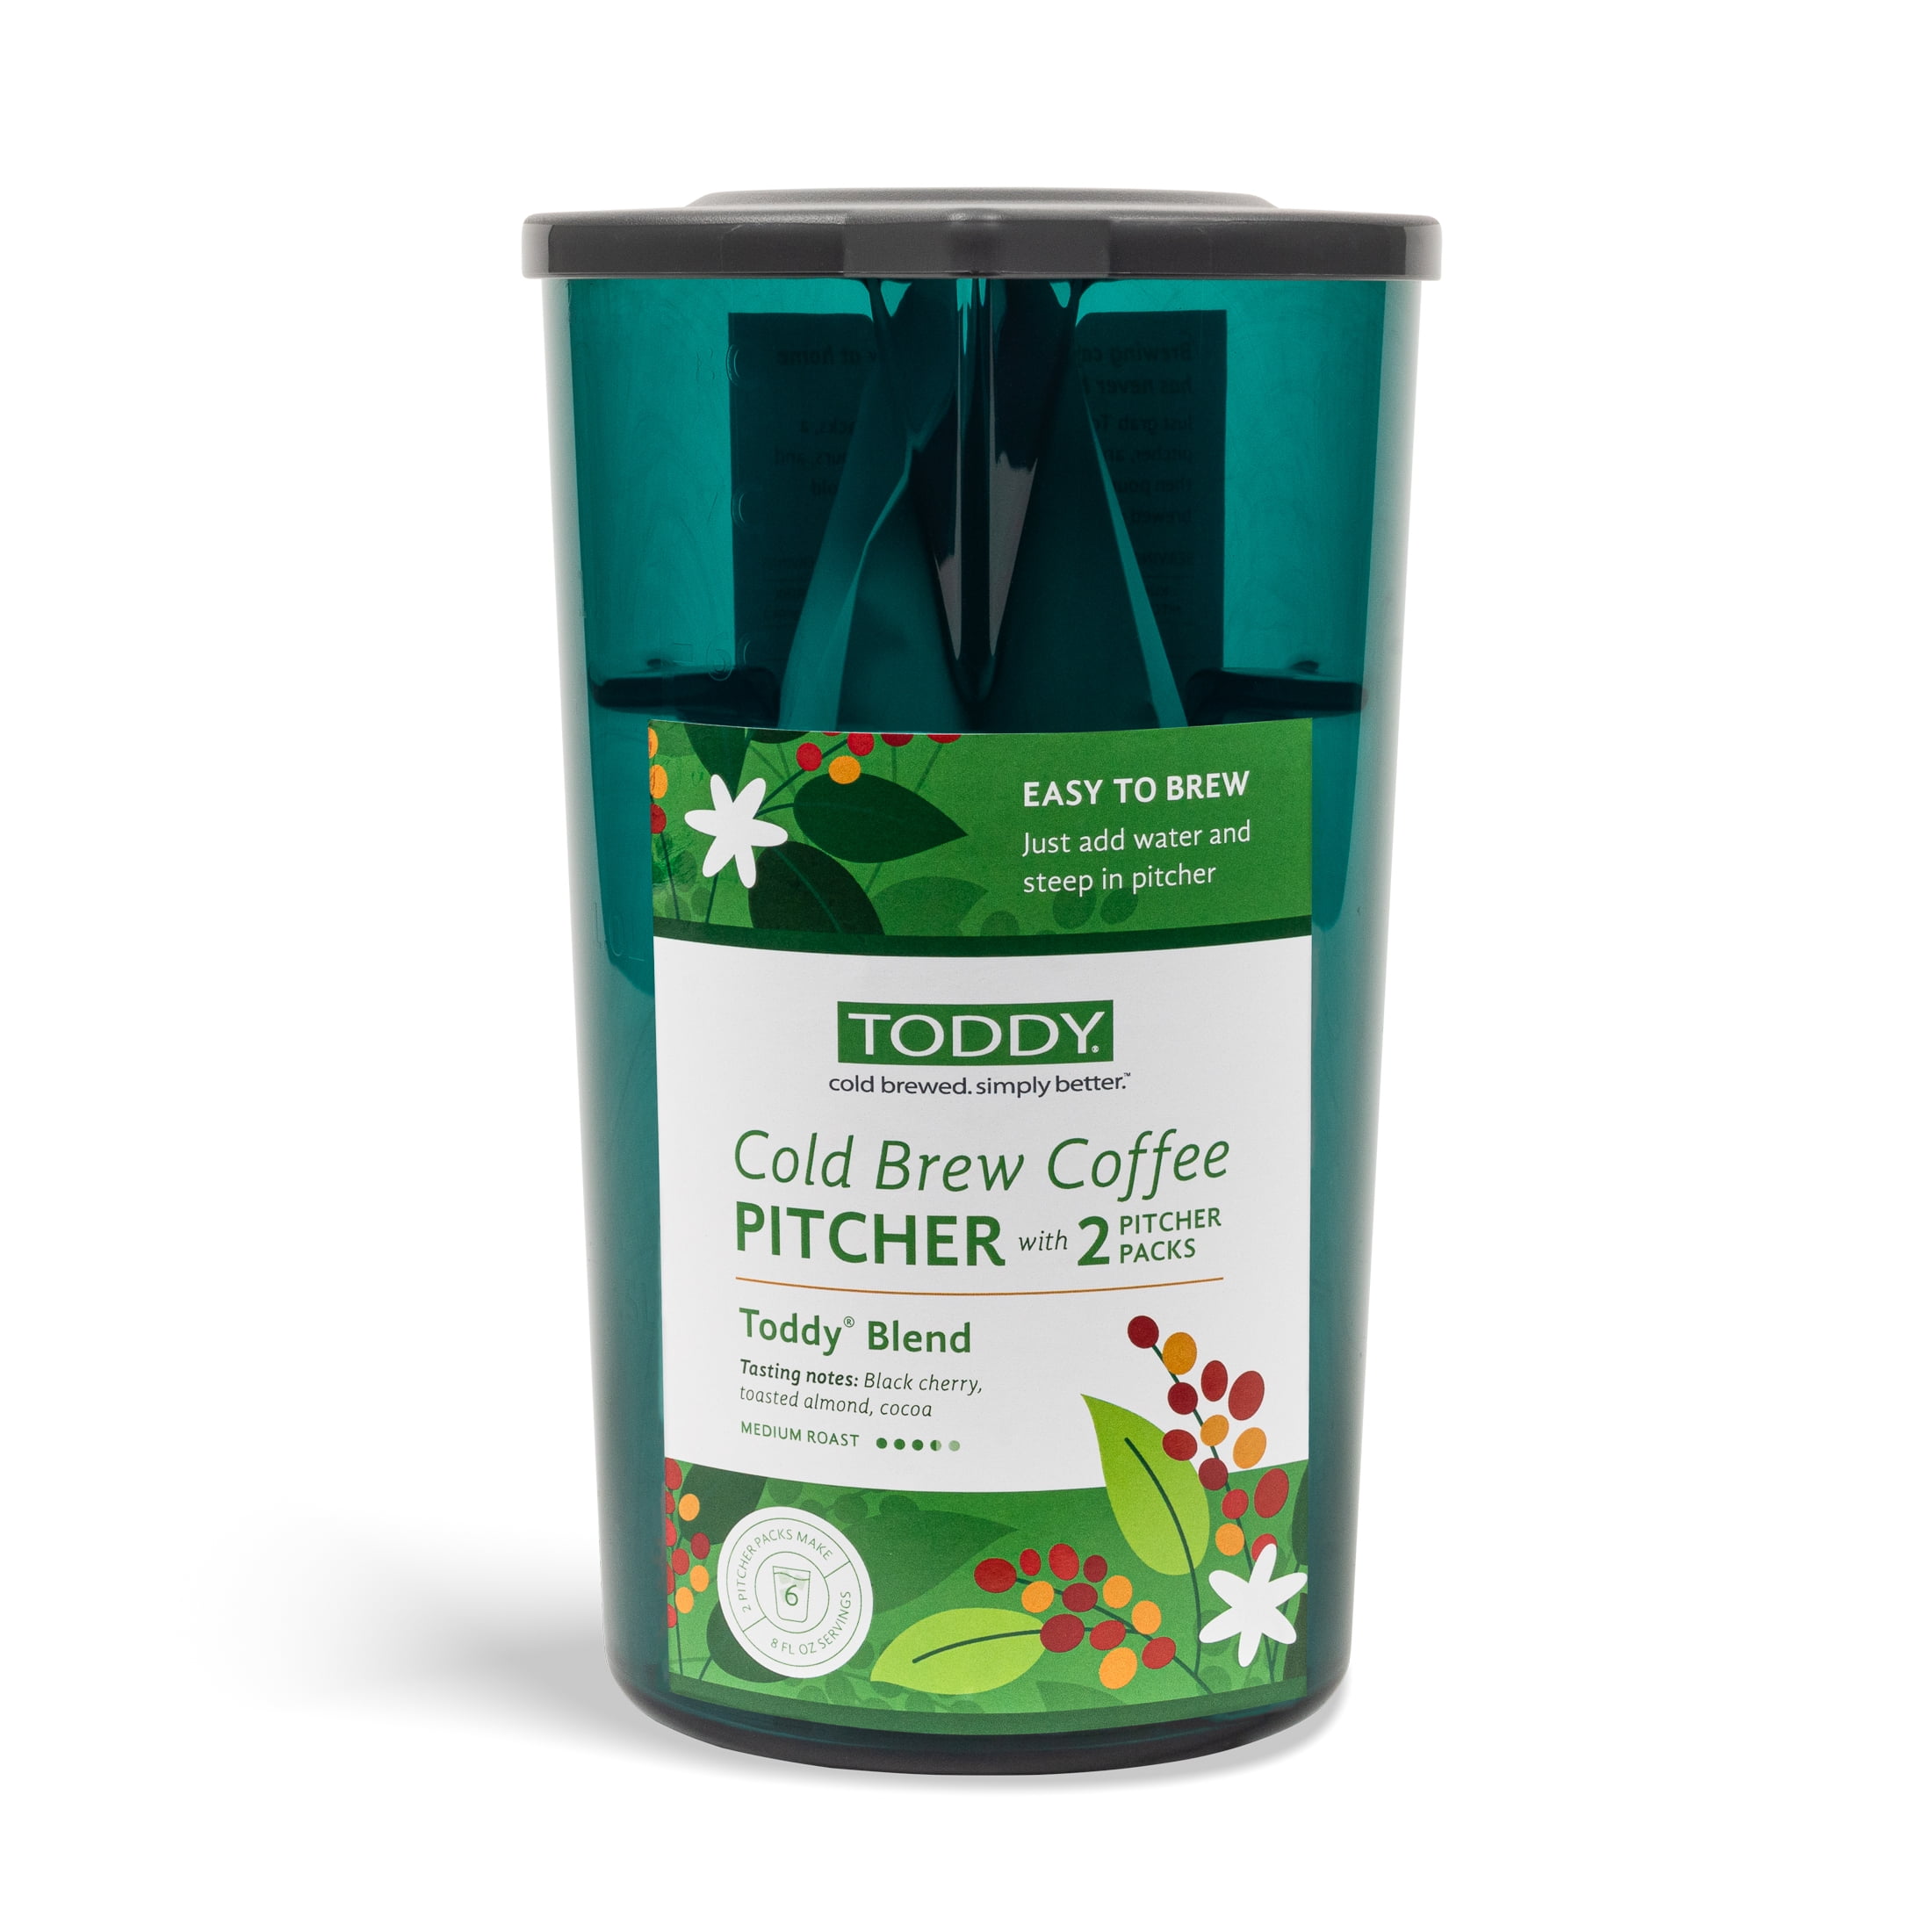 Toddy Cold Brew Coffee Pitcher Bundle (Cold Brew Brewing Container + 2x Pitcher Packs) $4.94 + Free S/H w/ Walmart+ or $35+